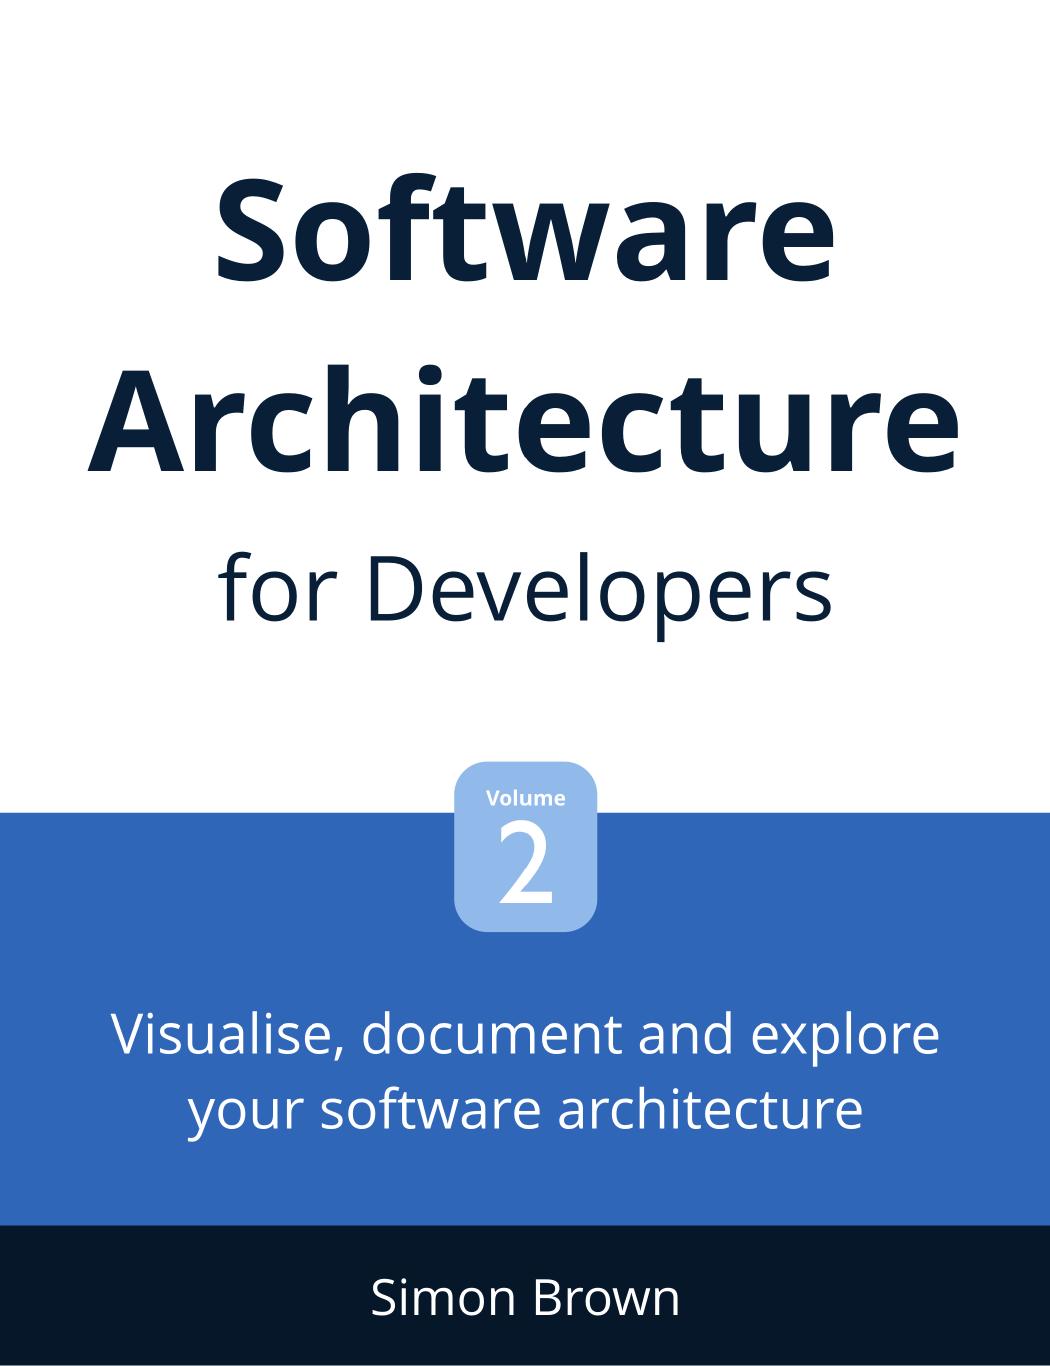 Visualise, document and explore your software architecture